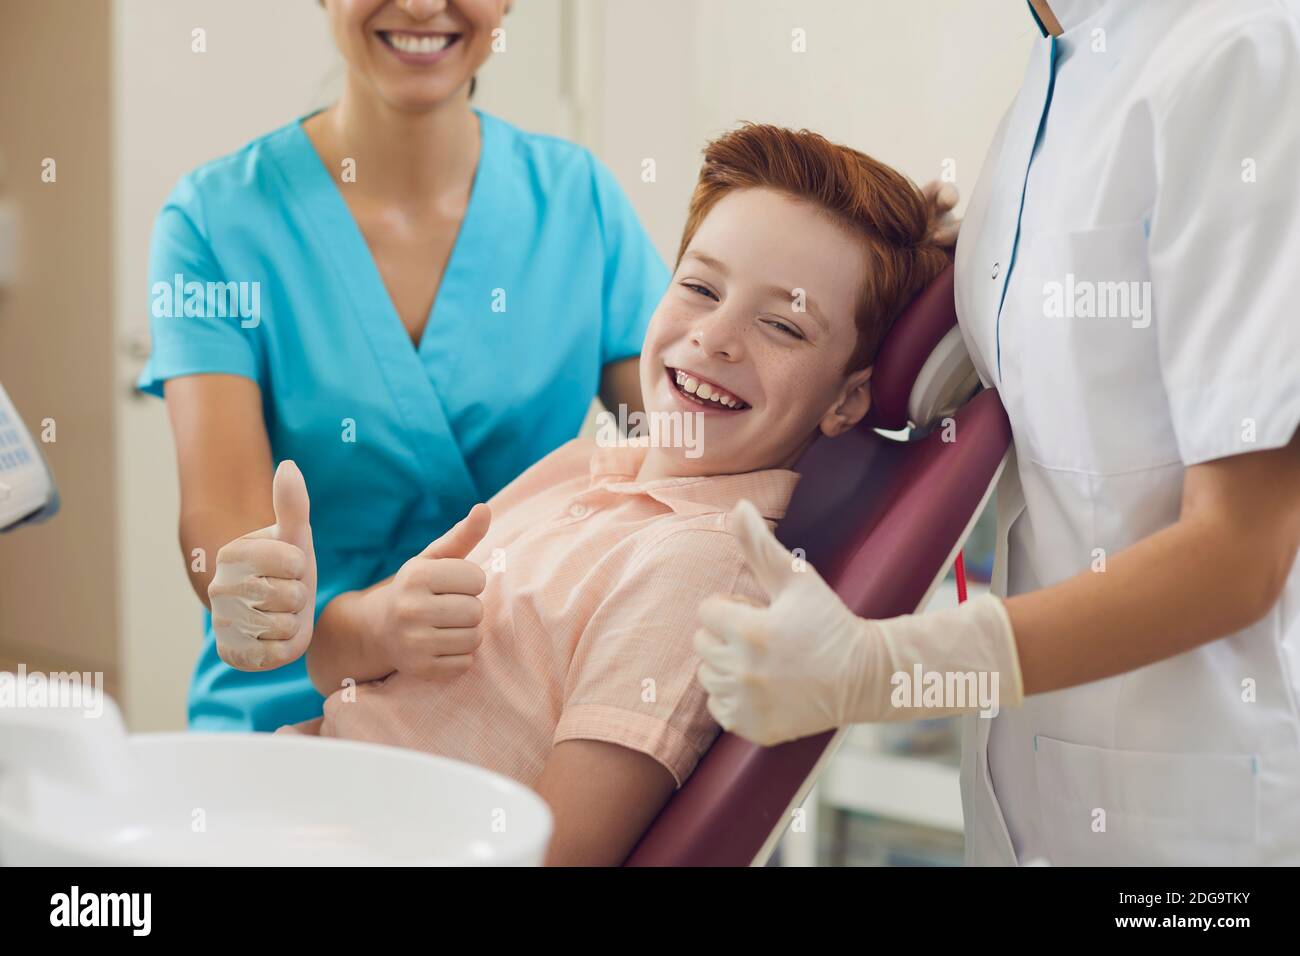 Reception of pediatric dentist in office. Healthy smile and teeth. Stock Photo